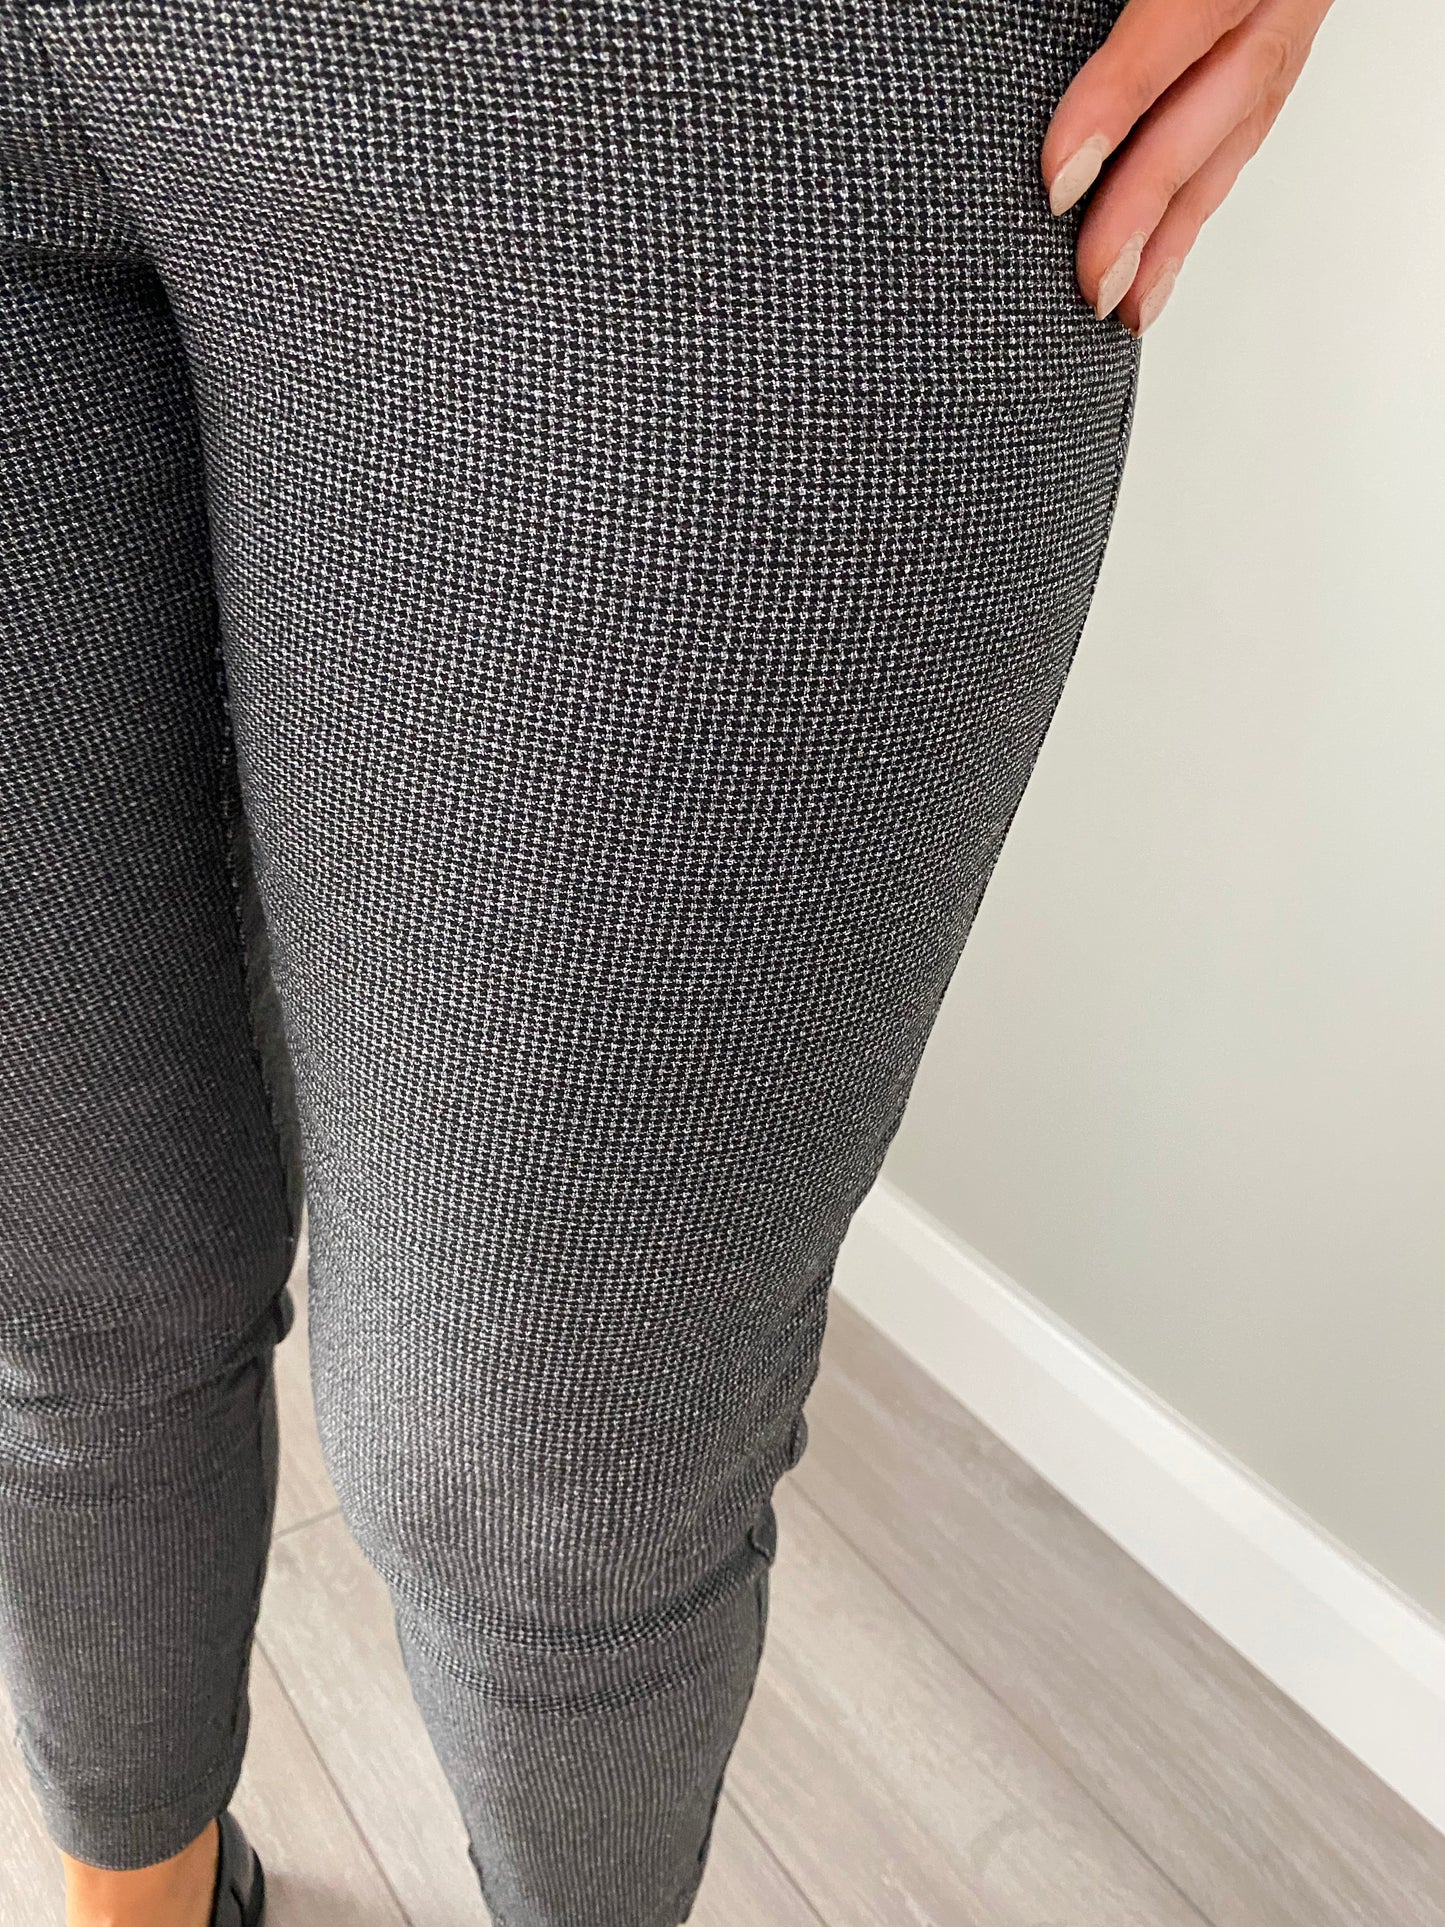 Freequent Grey/Black Trousers